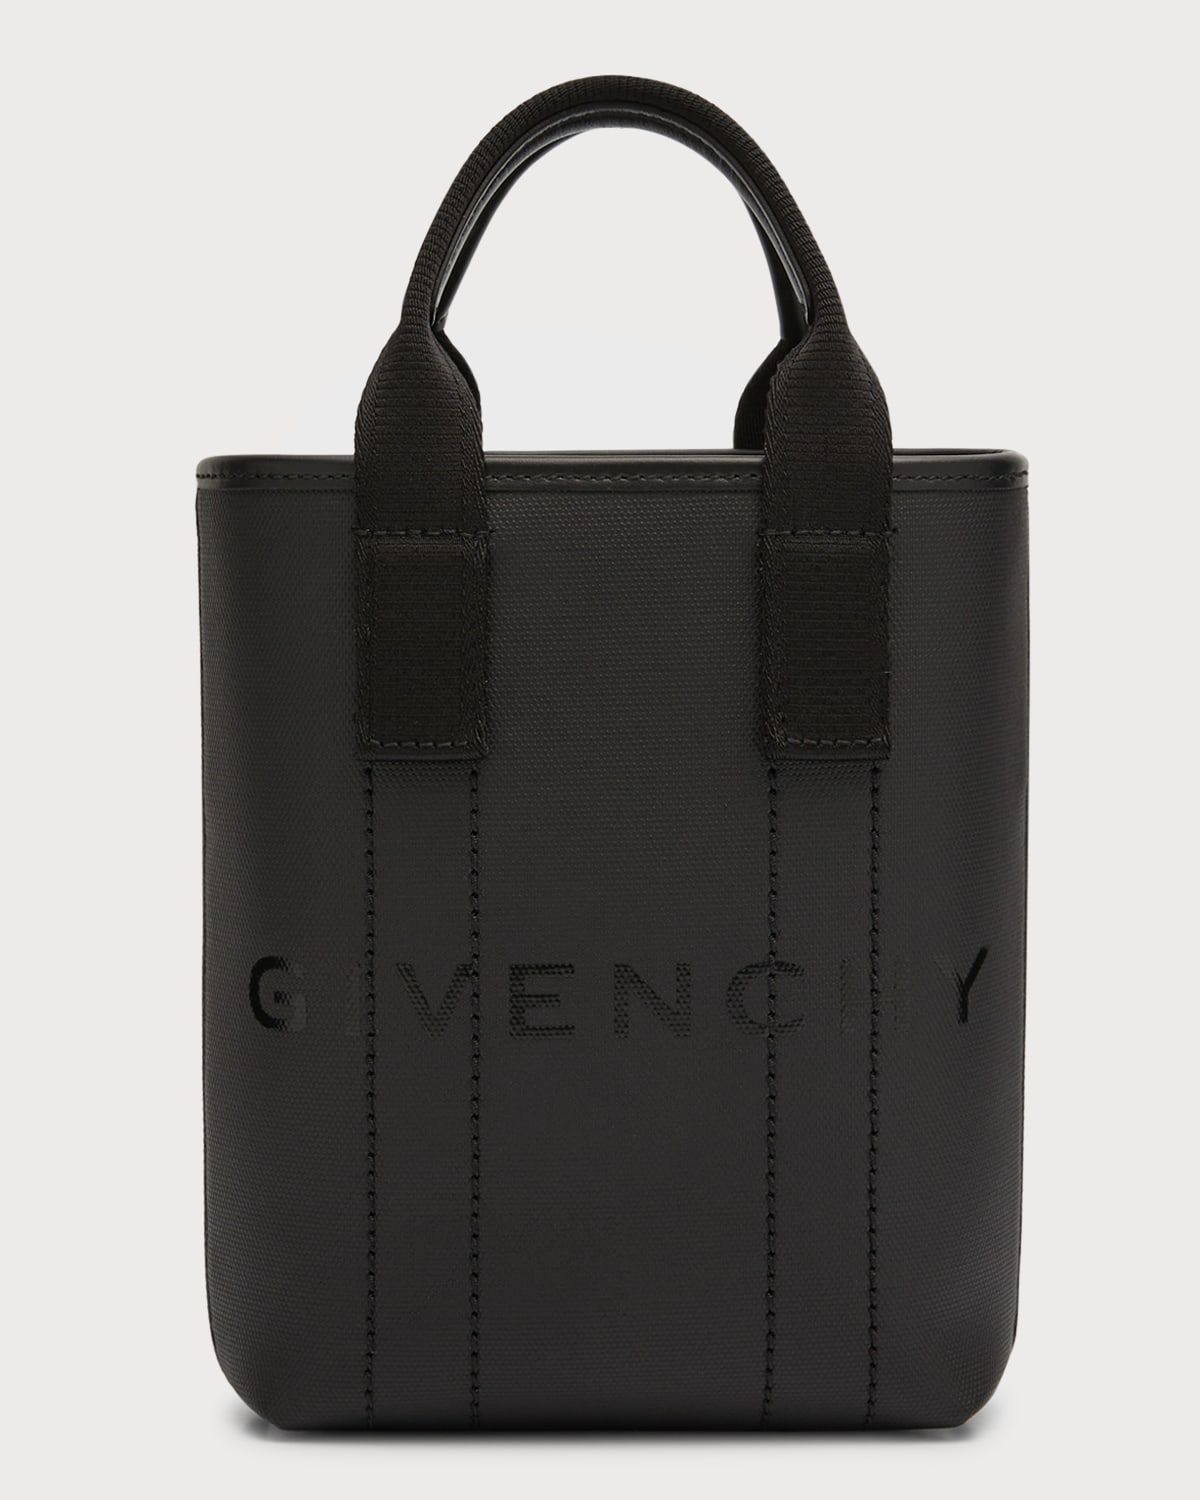 Givenchy Men's G-essentials Small Tote Bag In Black